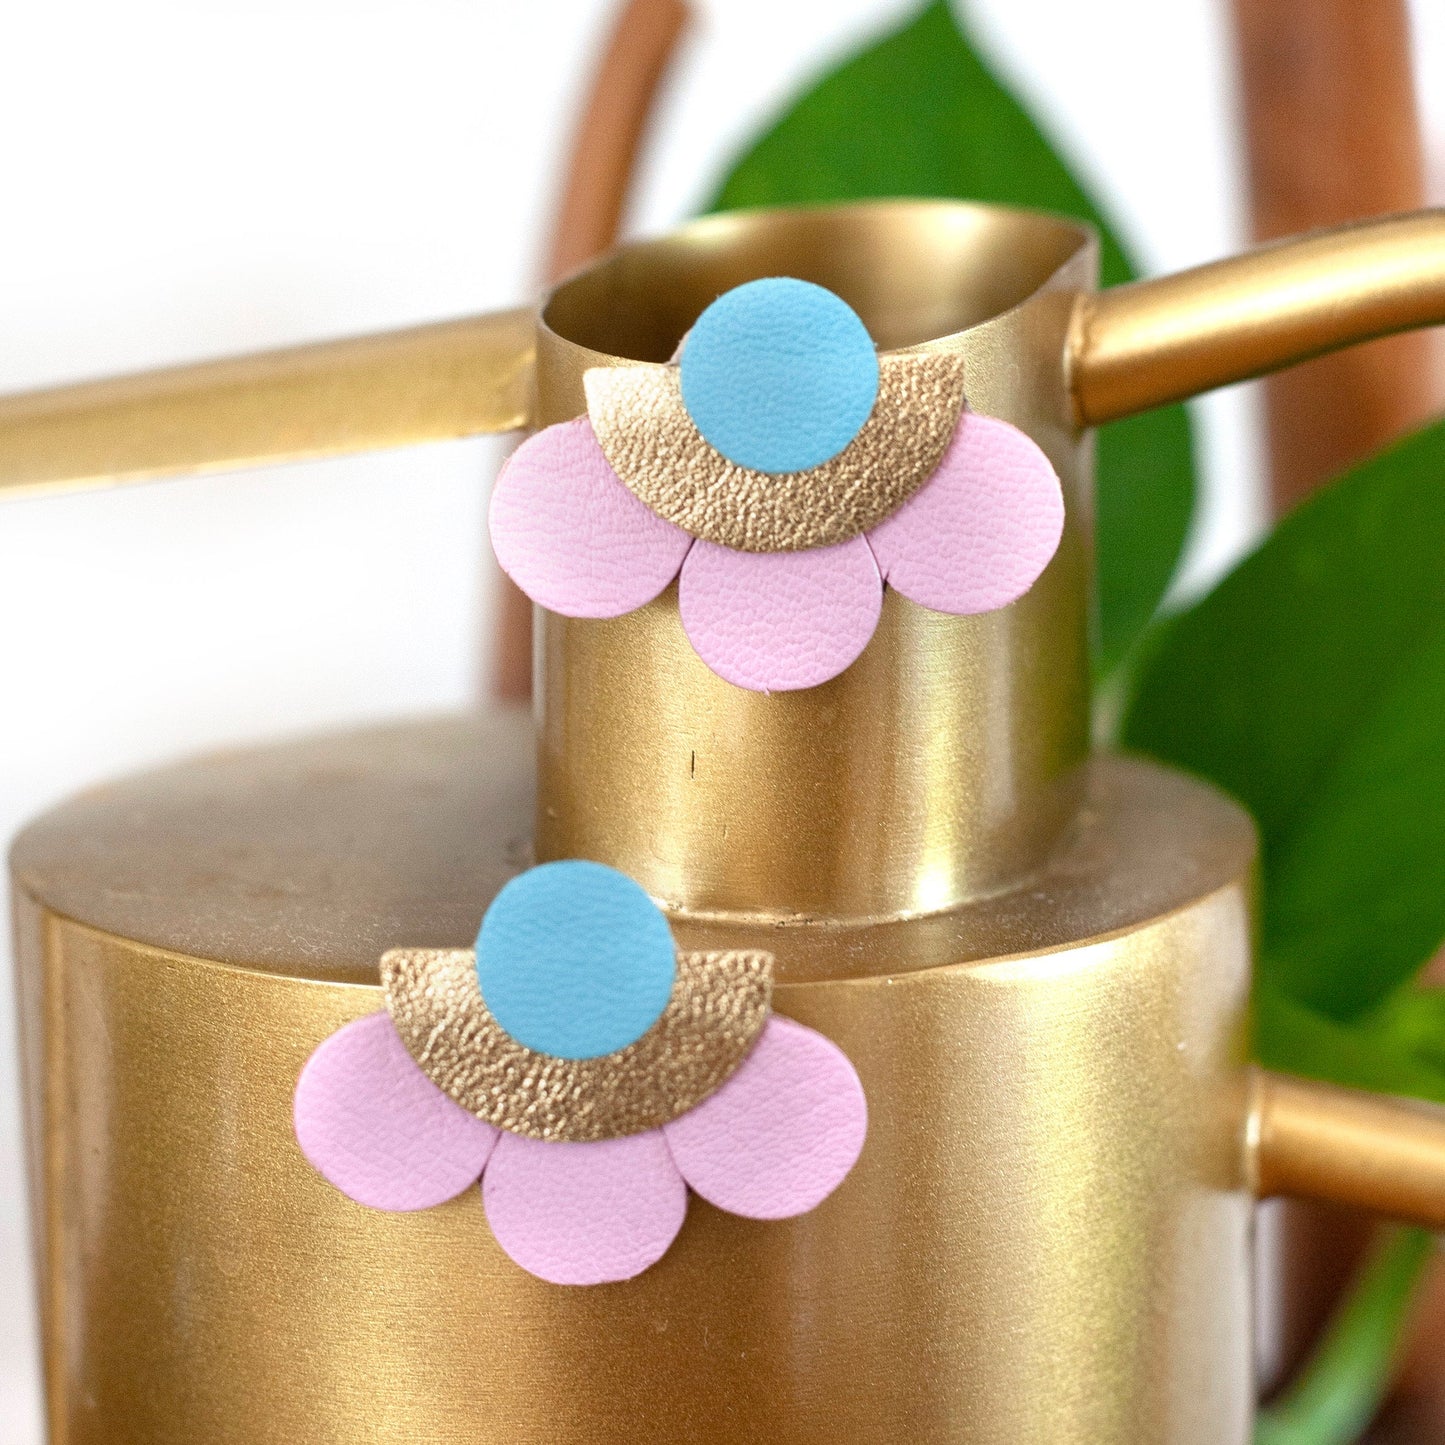 Semi-circle flower stud earrings in pink, blue and gold leather